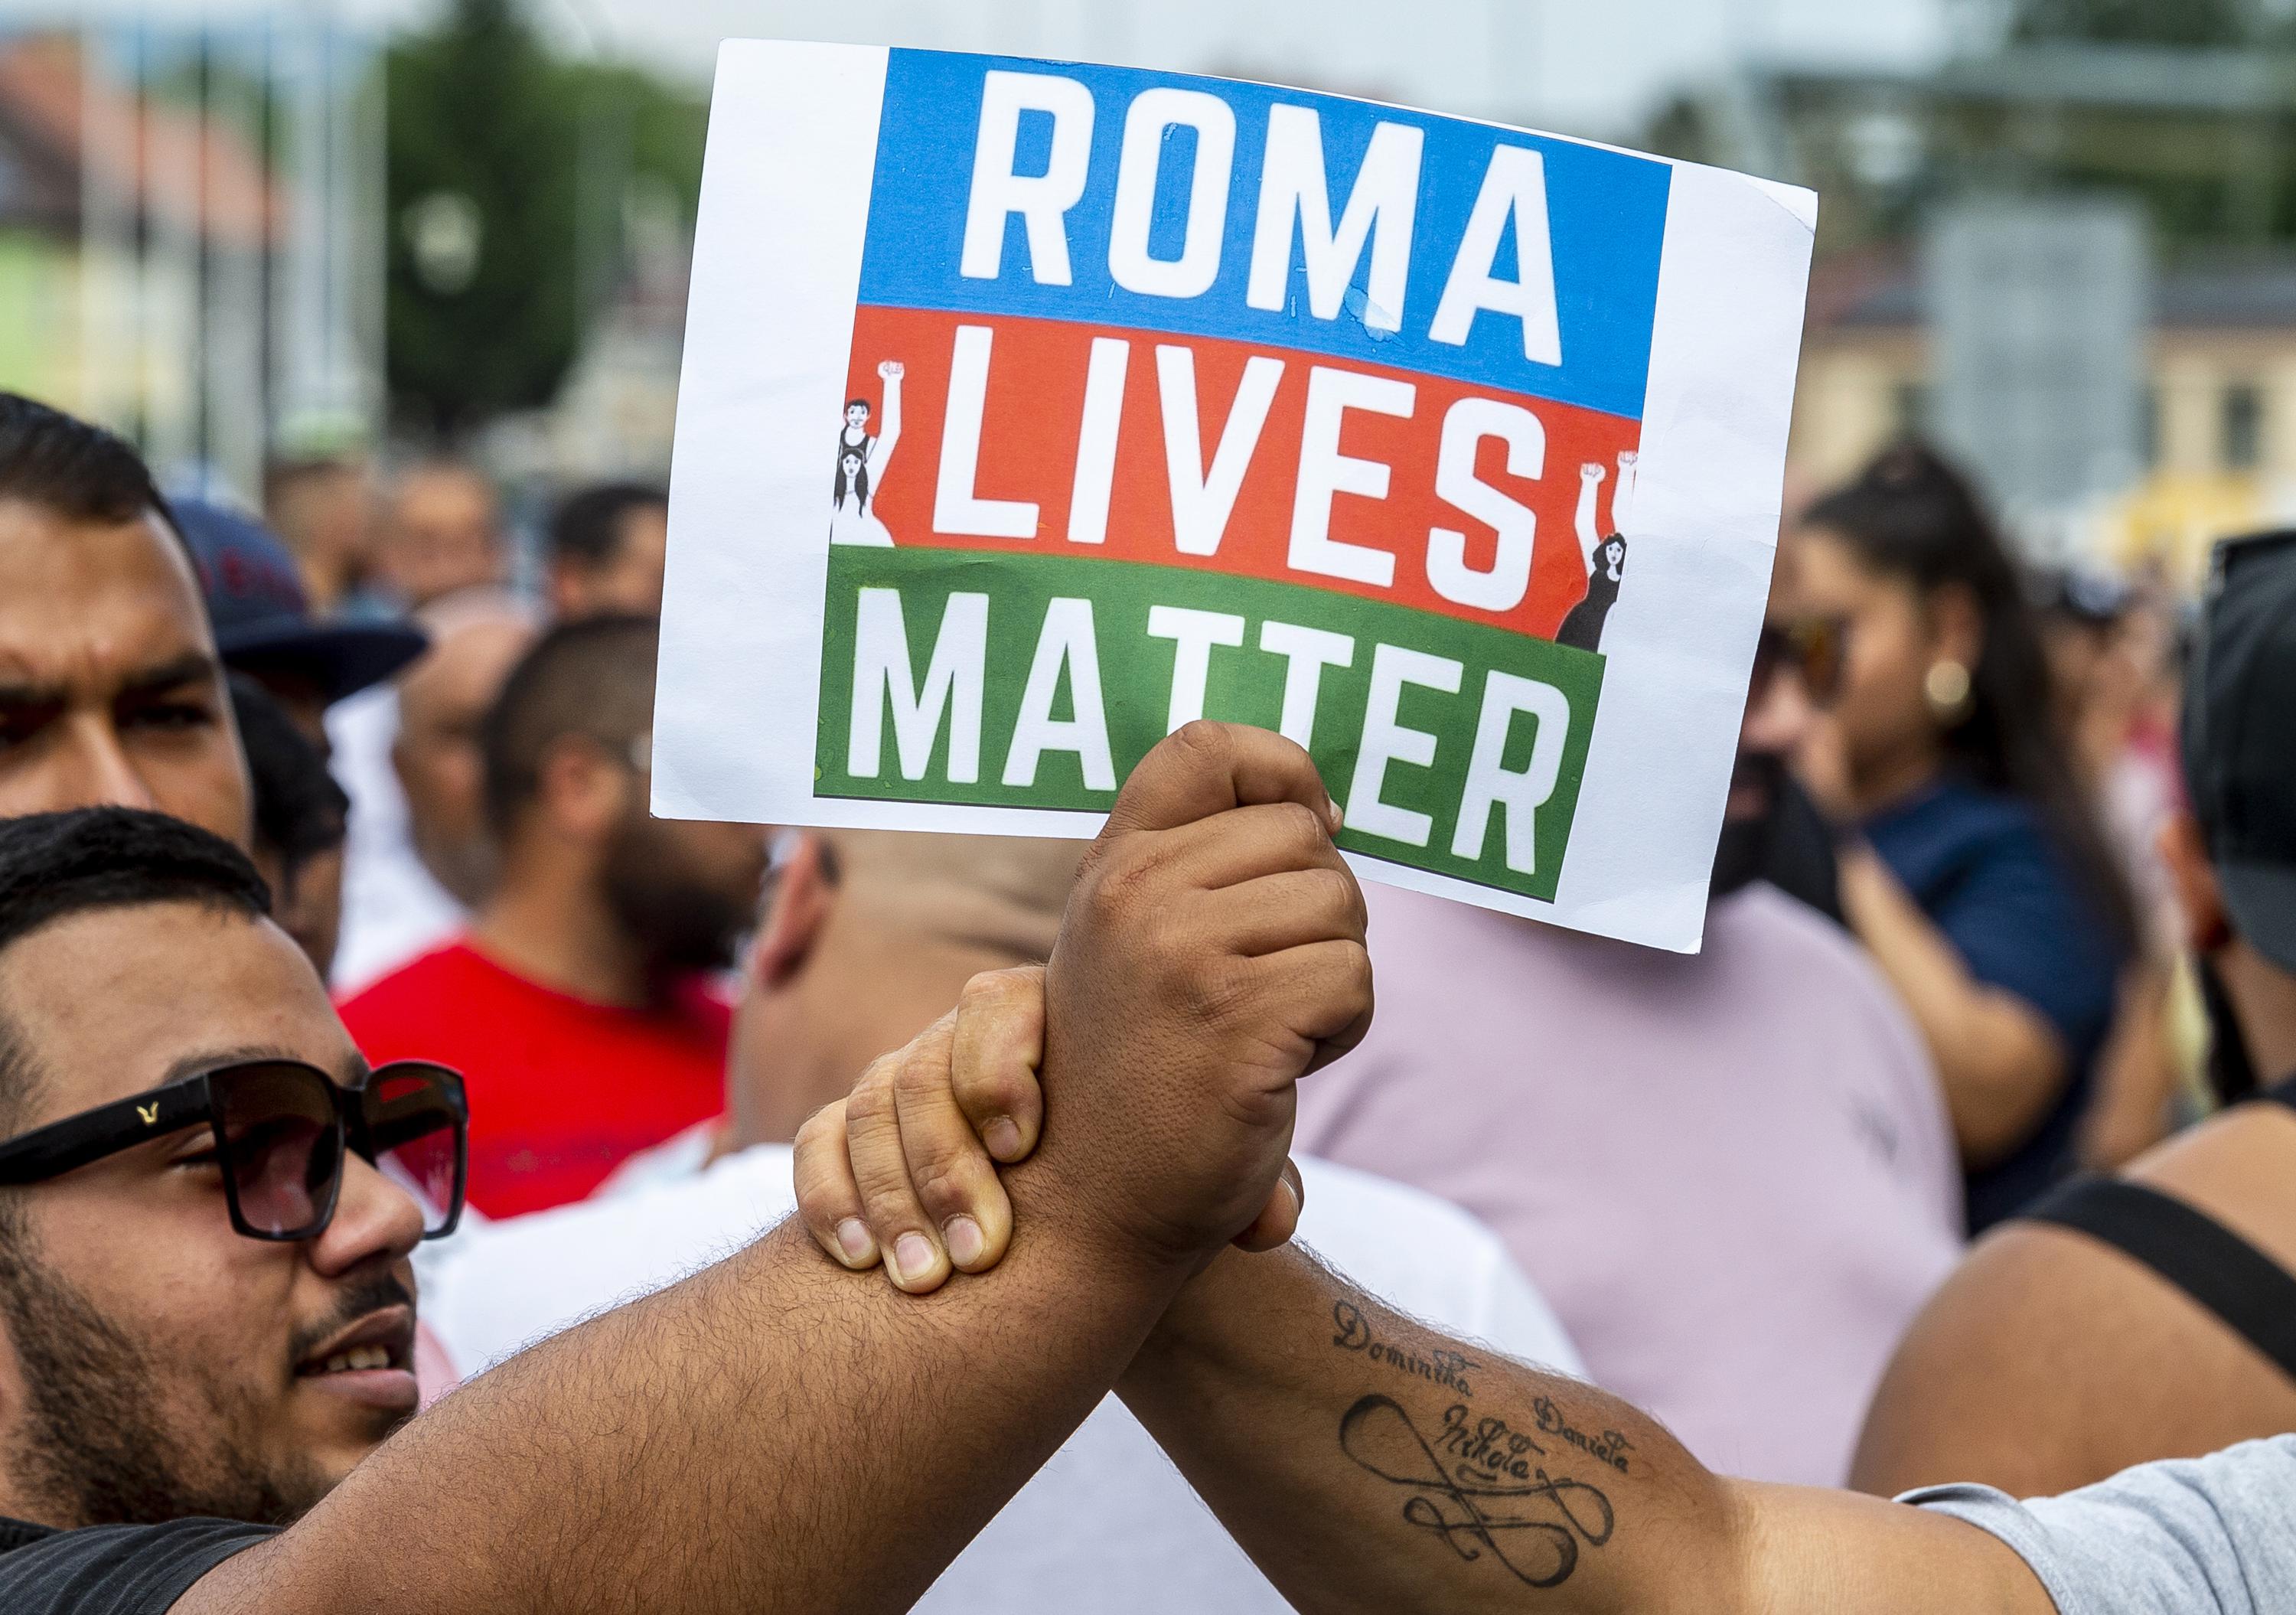 Hundreds Protest Against Czech Police Over Roma Mans Death 